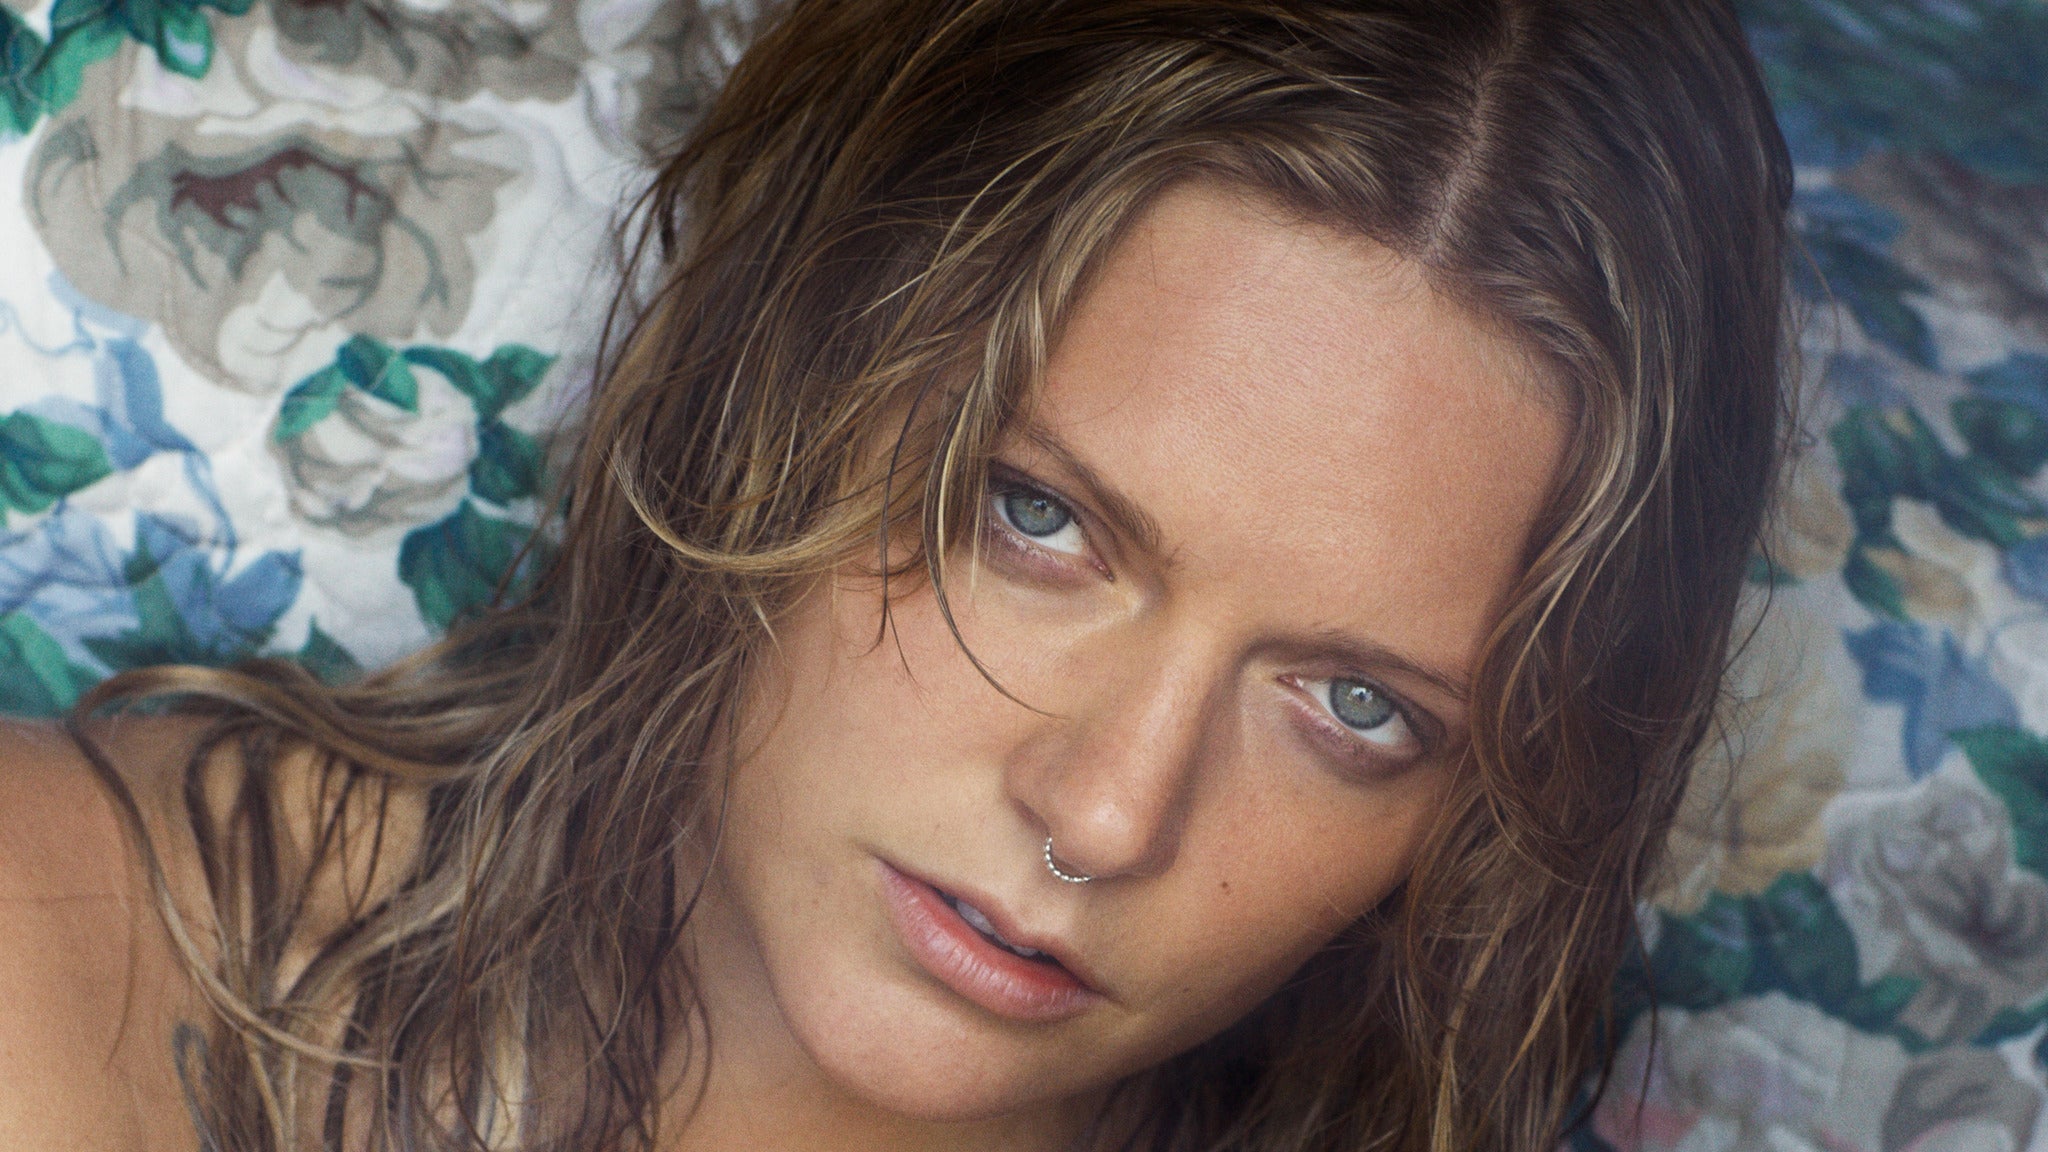 Tove Lo - Sunshine Kitty Tour in Detroit promo photo for Spotify presale offer code